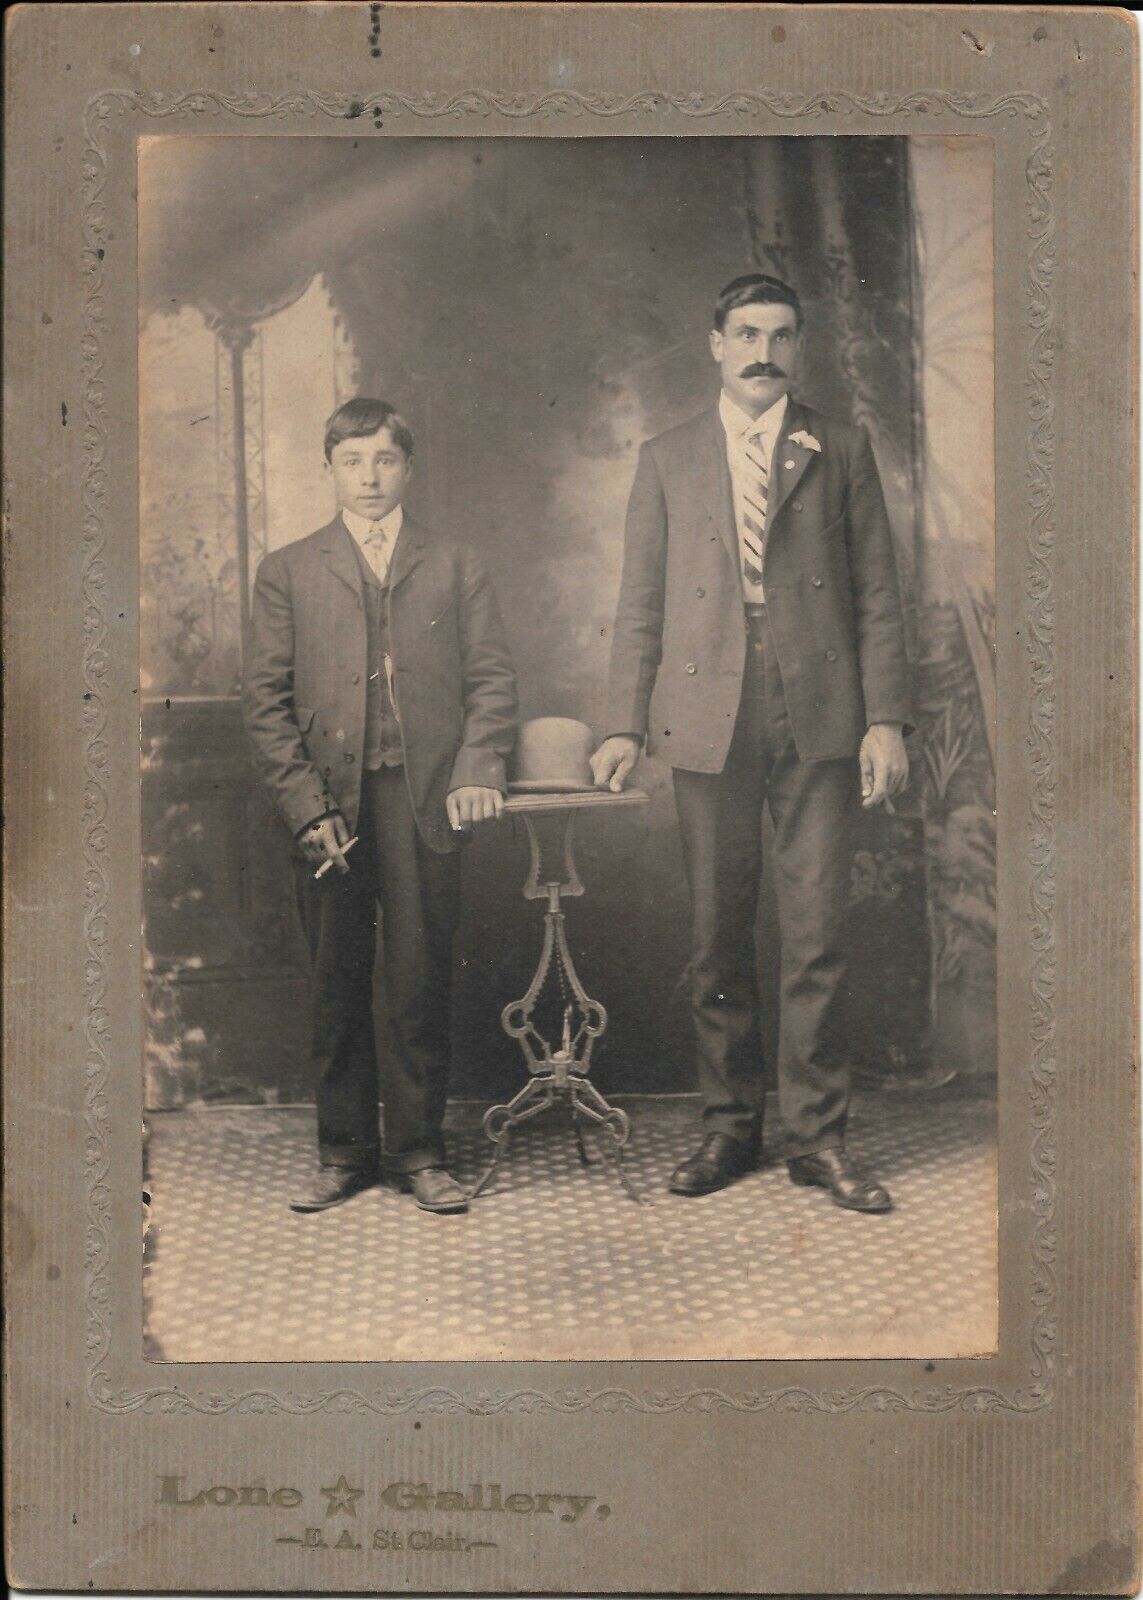 Cabinet Photo Believed to be Pat Garrett, Possibly With Billy the Kid